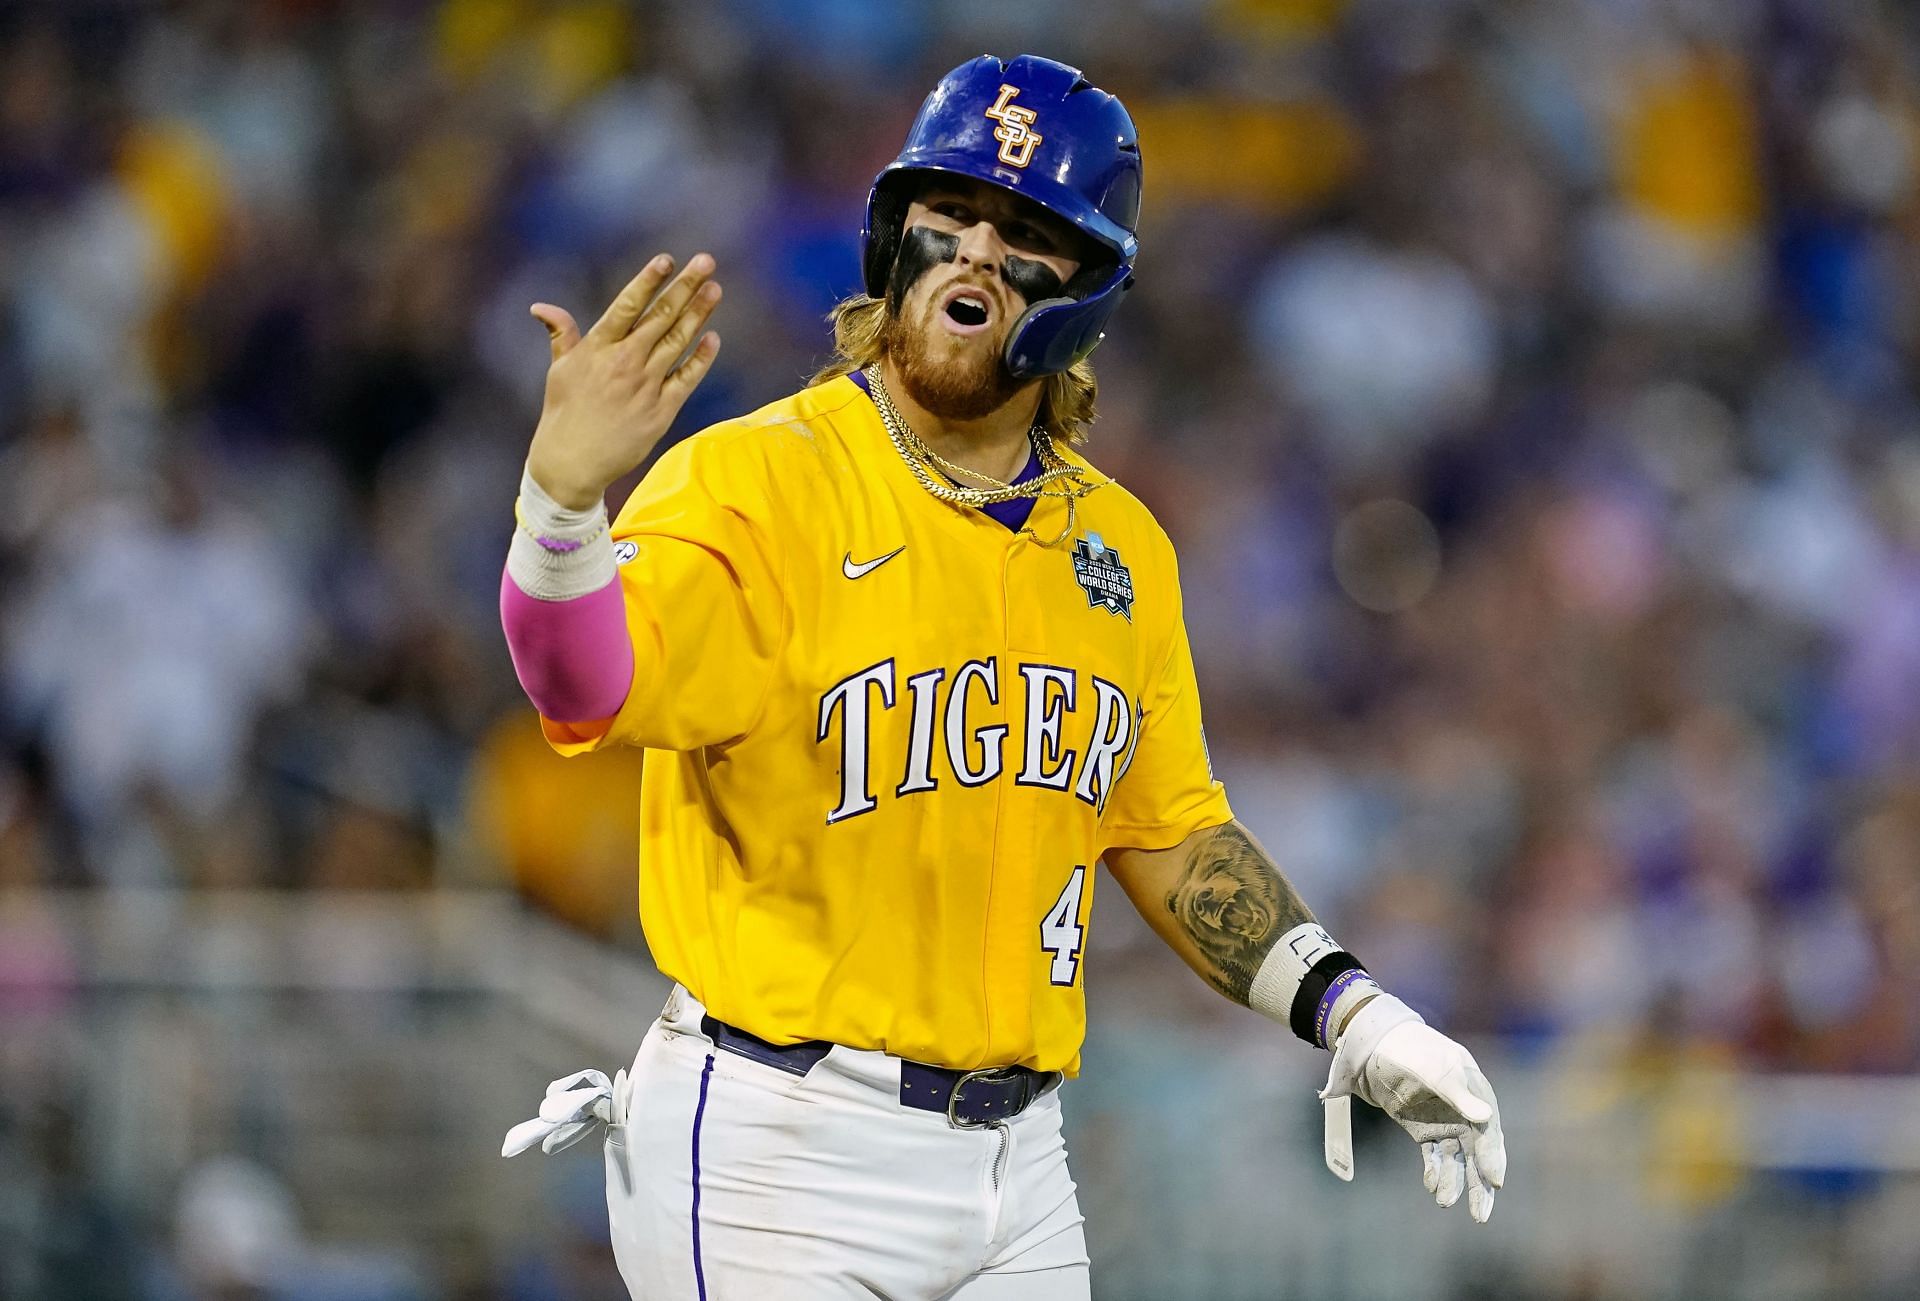 Tommy White #47 of the LSU Tigers gestures to the dugout after being intentionally walked during the College World Series.